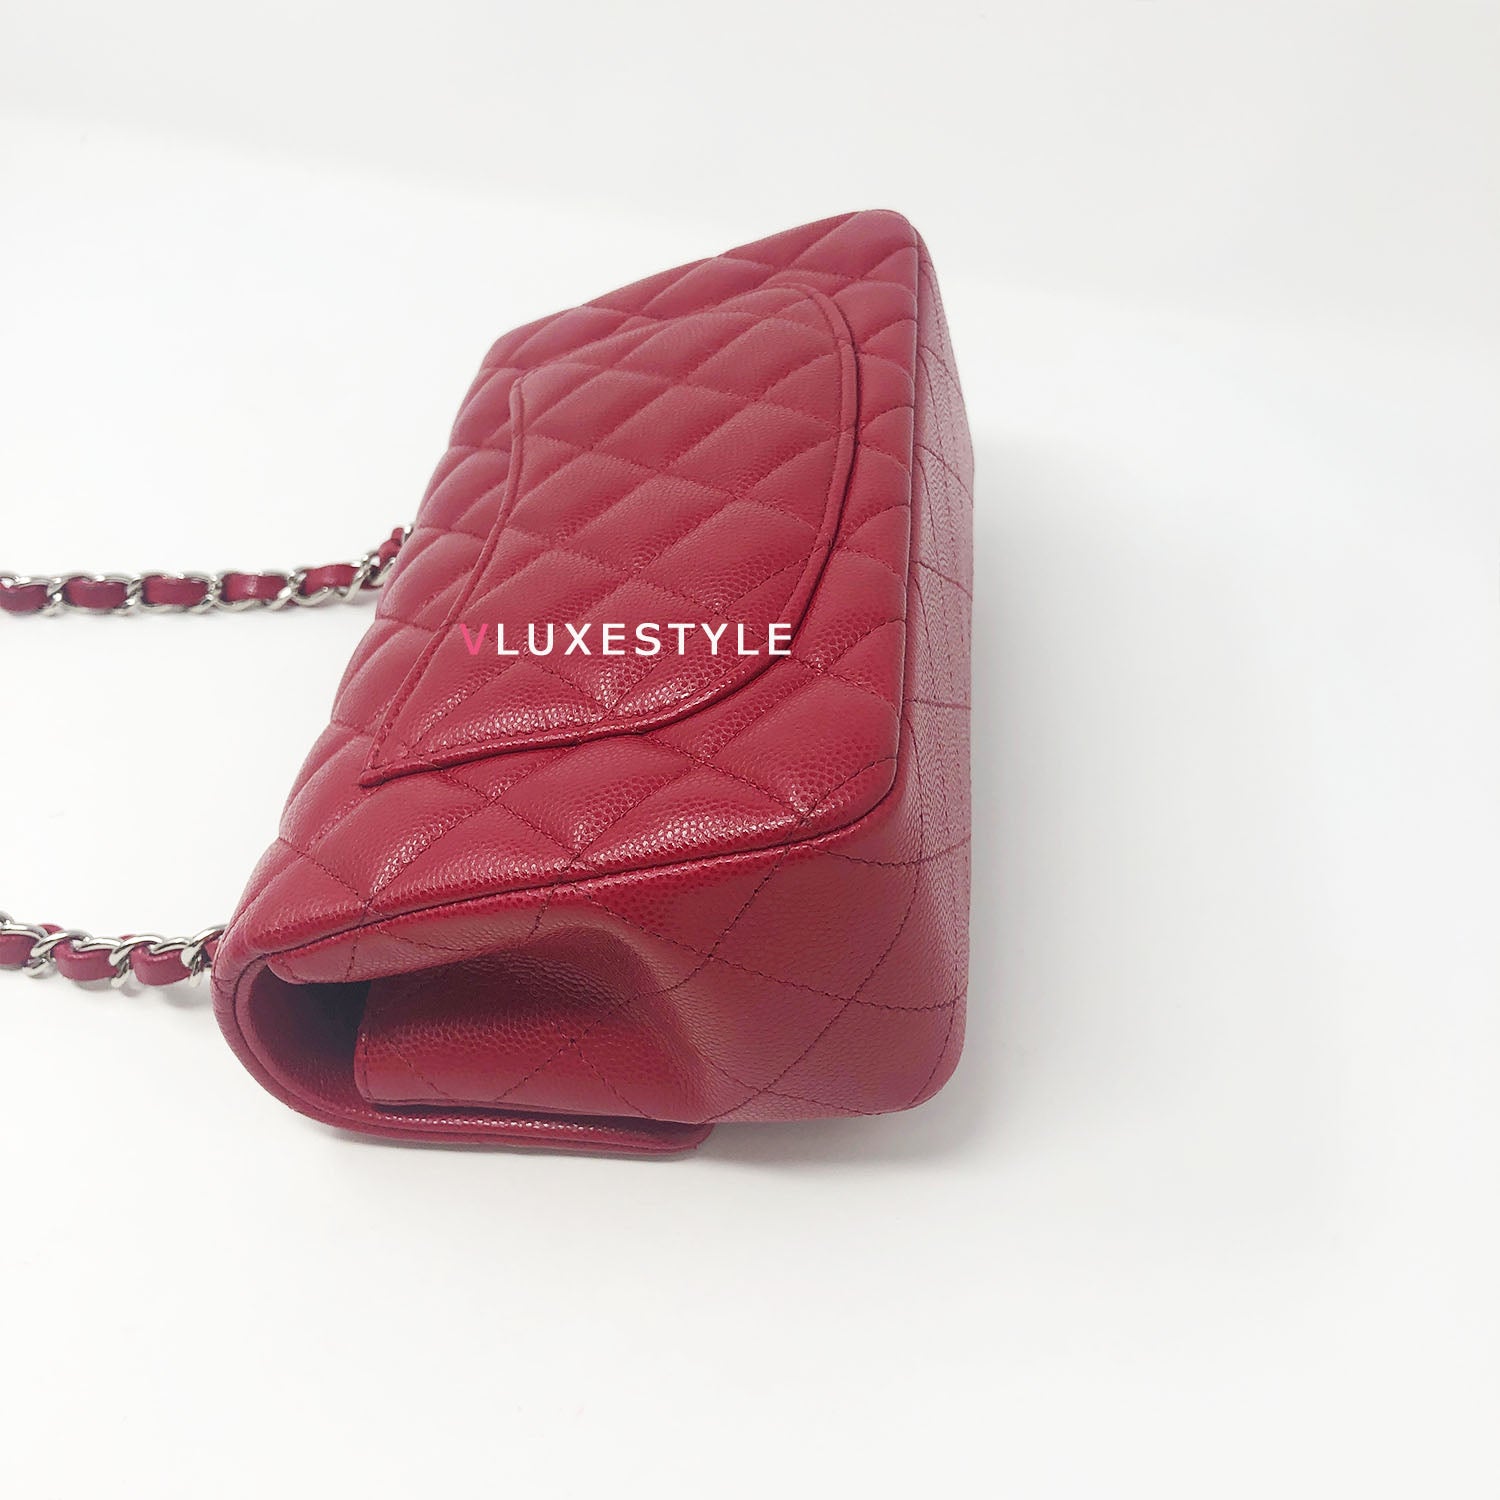 Chanel Classic Zip Card Holder / Small Wallet in Raspberry Red Caviar SHW